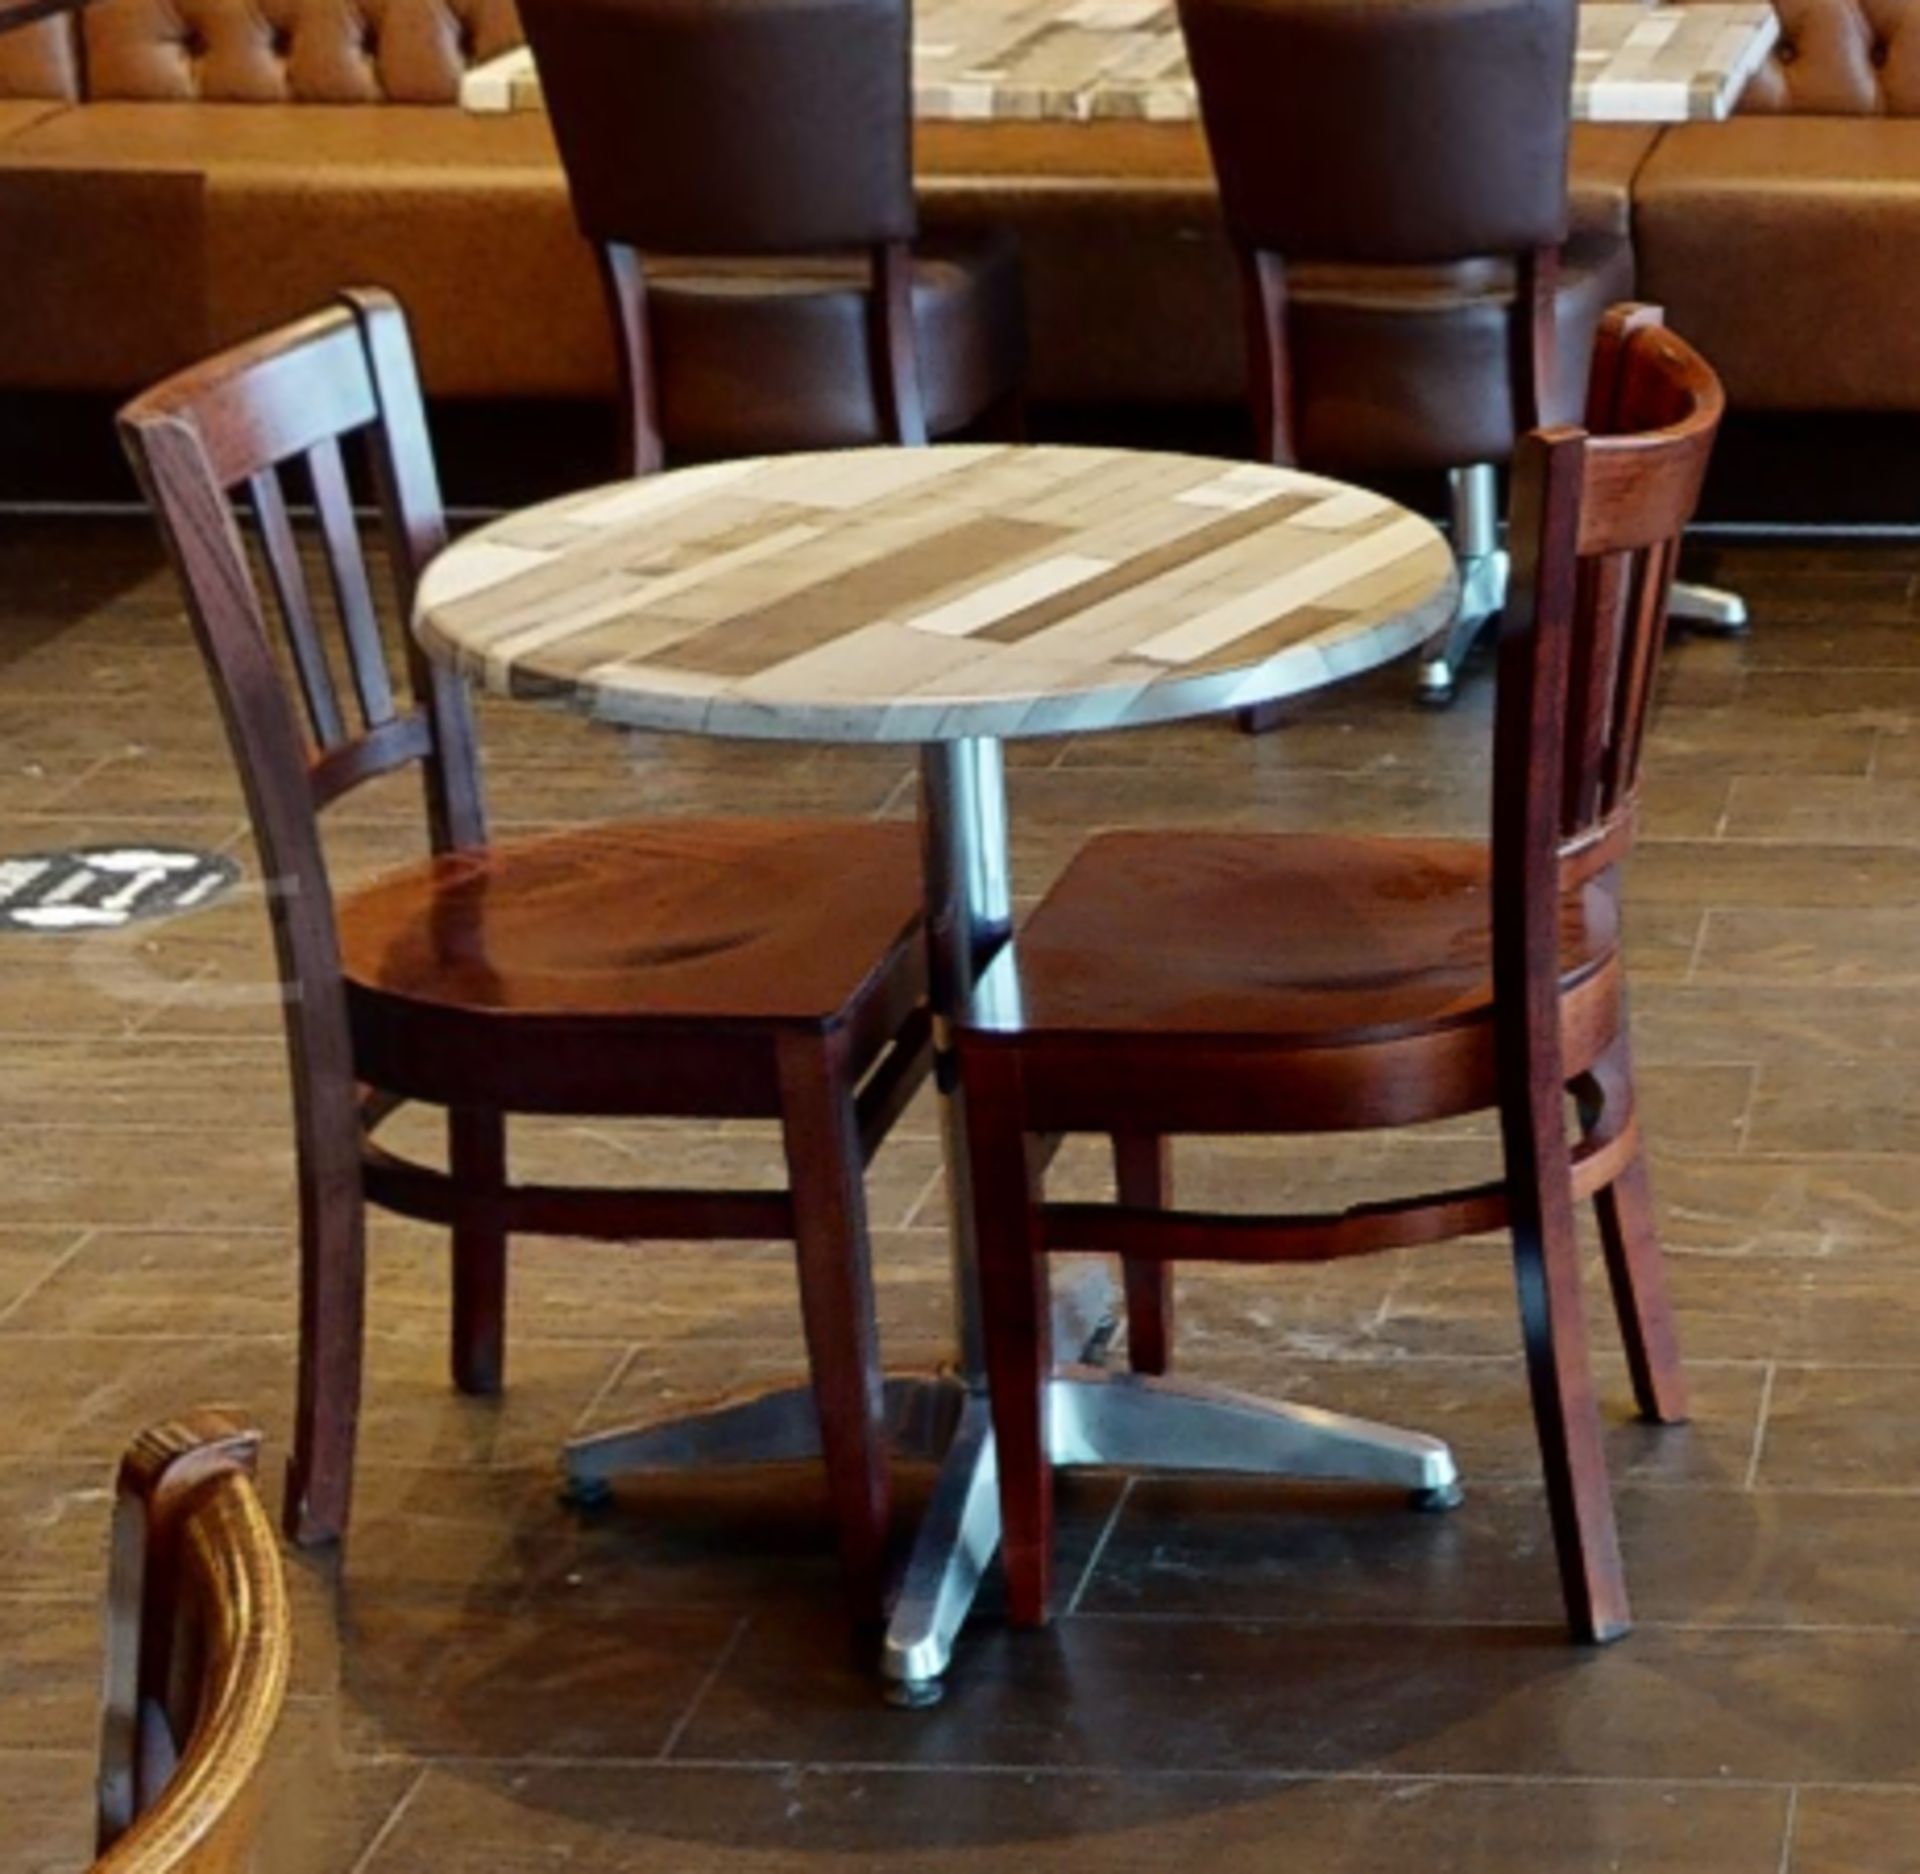 10 x Two Seater Restaurant Tables With Wood Panel Effect Tops and Chromes Bases - CL701 - - Image 2 of 9